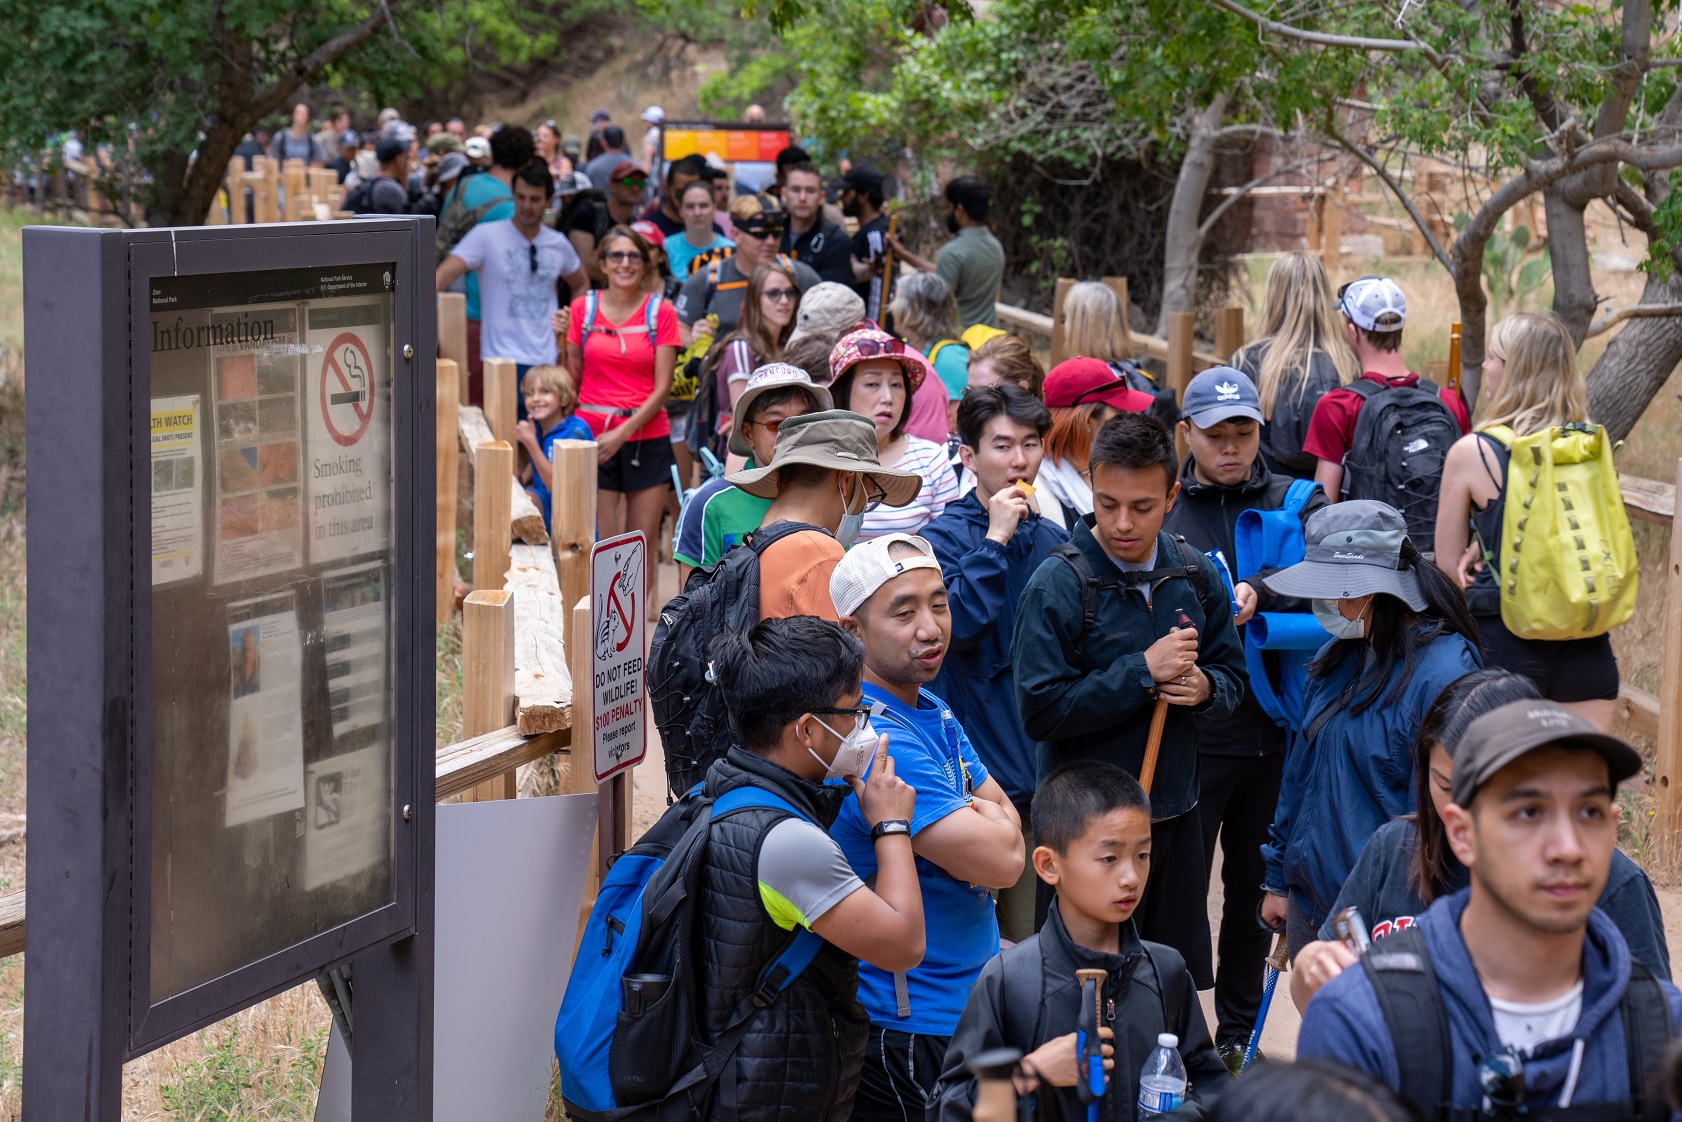 Line of people stands on paved trail in Zion National Park